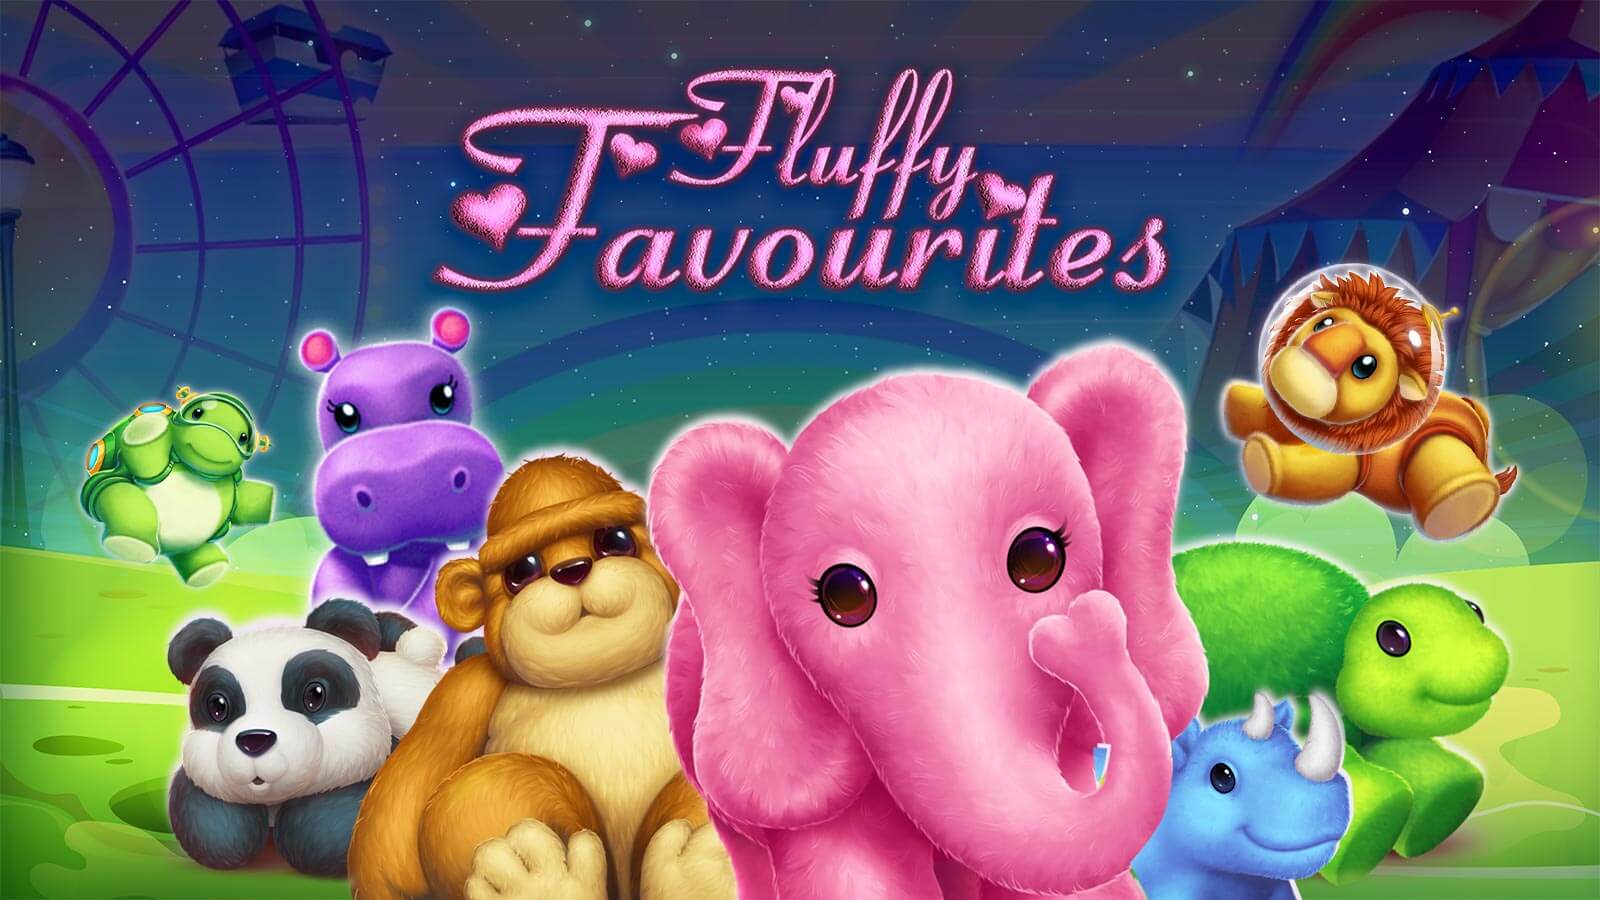 Best Eyecon Slots From The Fluffy Favourites Series